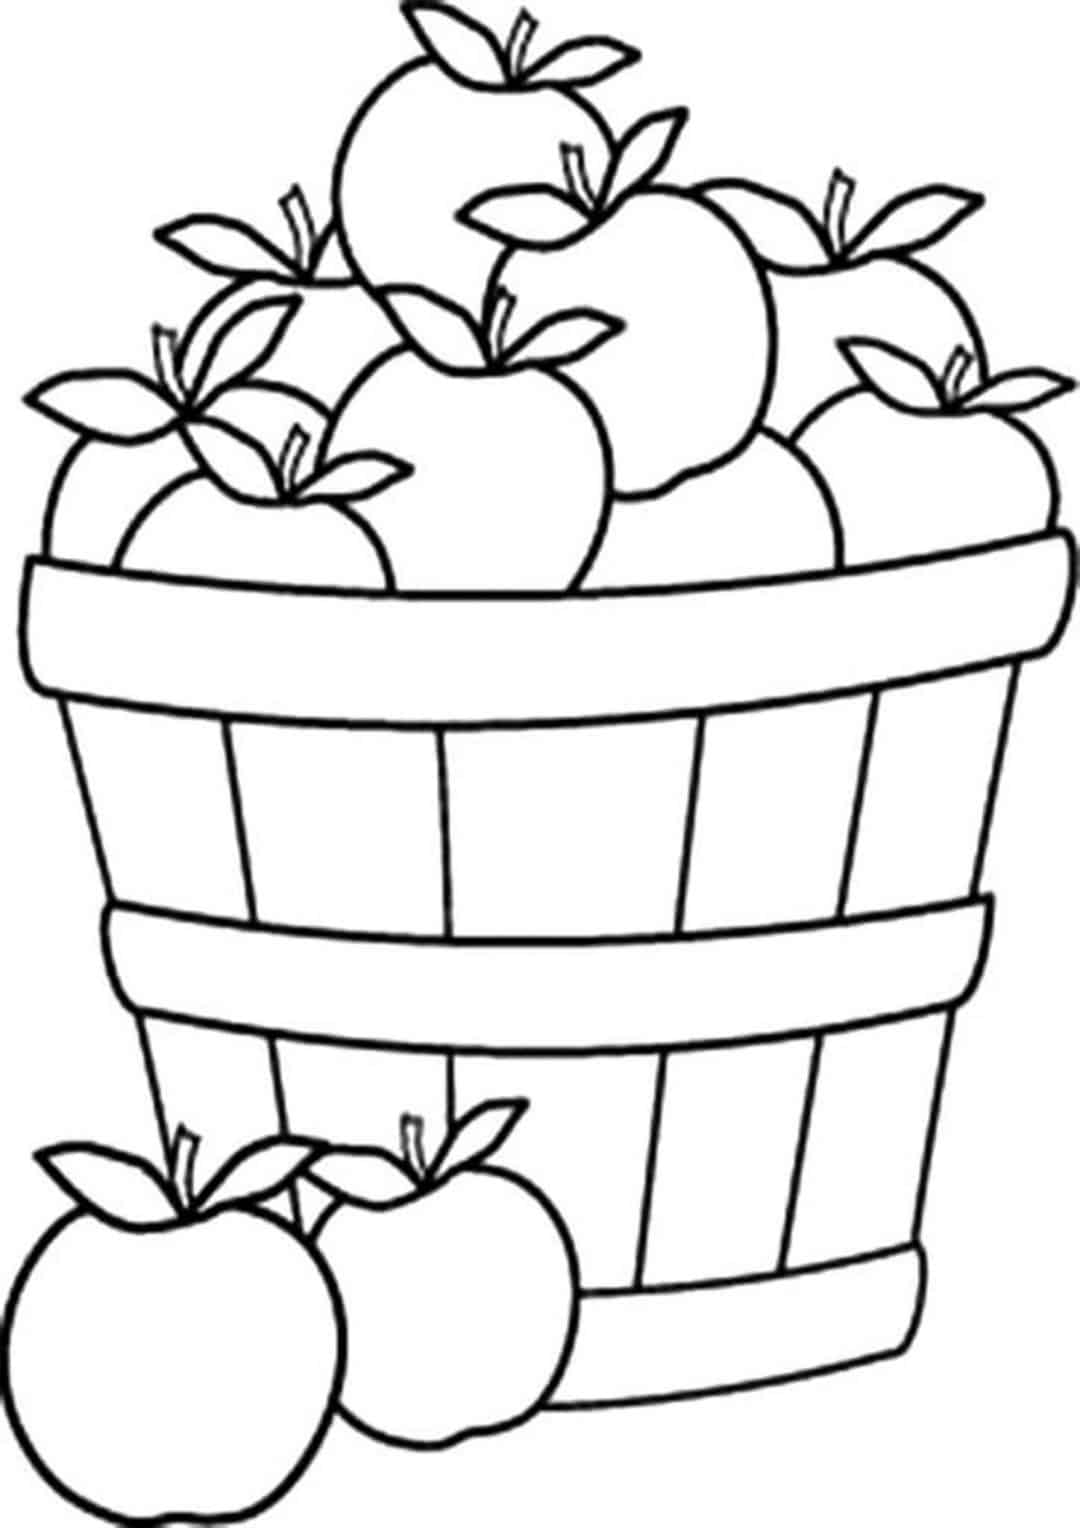 free-easy-to-print-apple-coloring-pages-tulamama